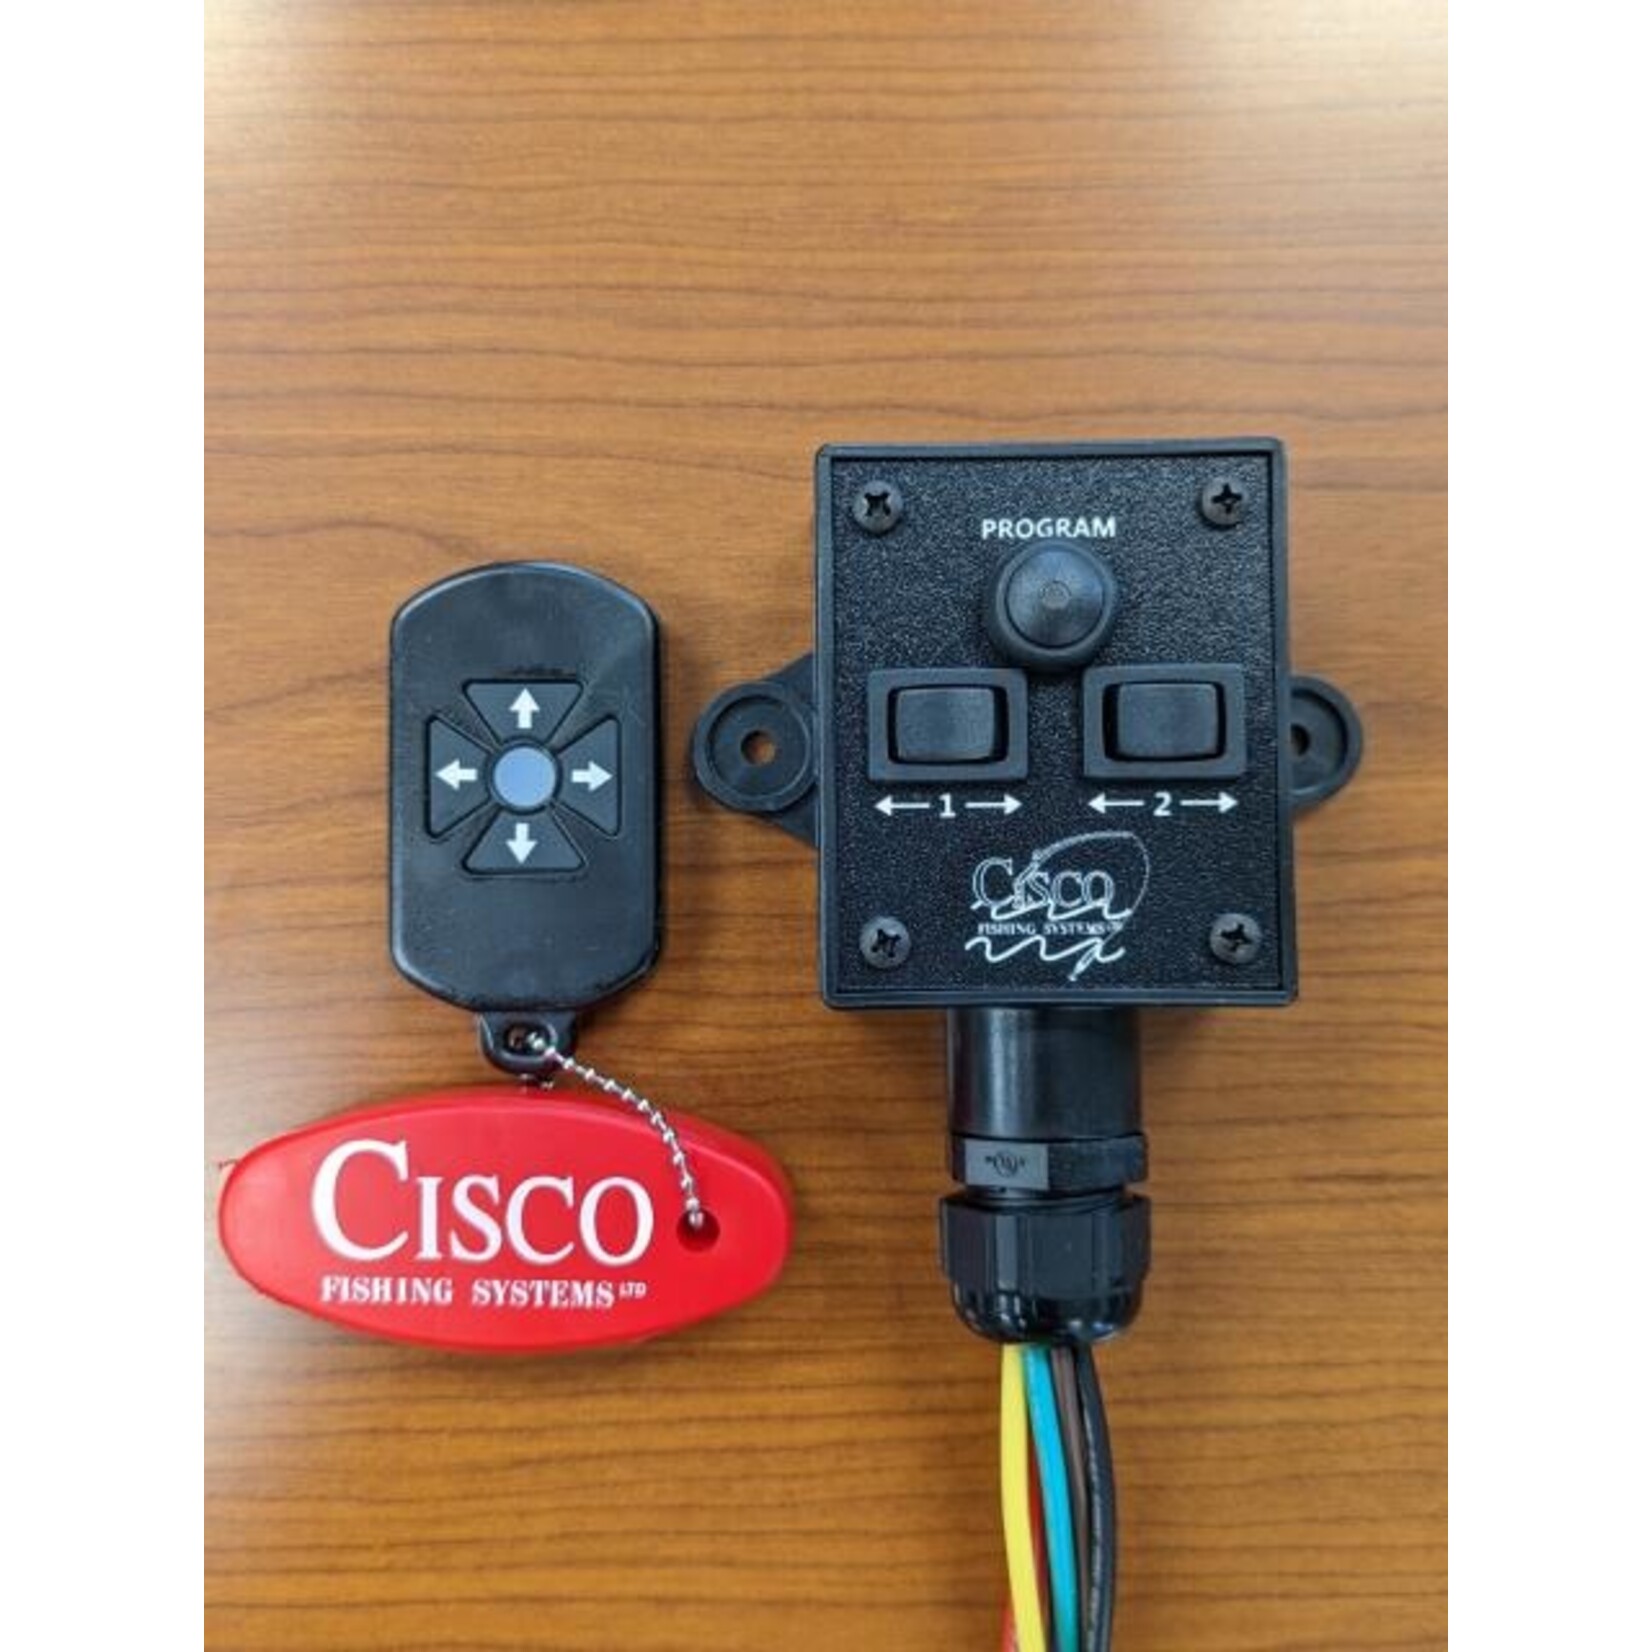 CISCO PLANNER BOARD CONTROLBOX WITH REMOTE TRANSMITTER CONTROLS 2 MOTORS